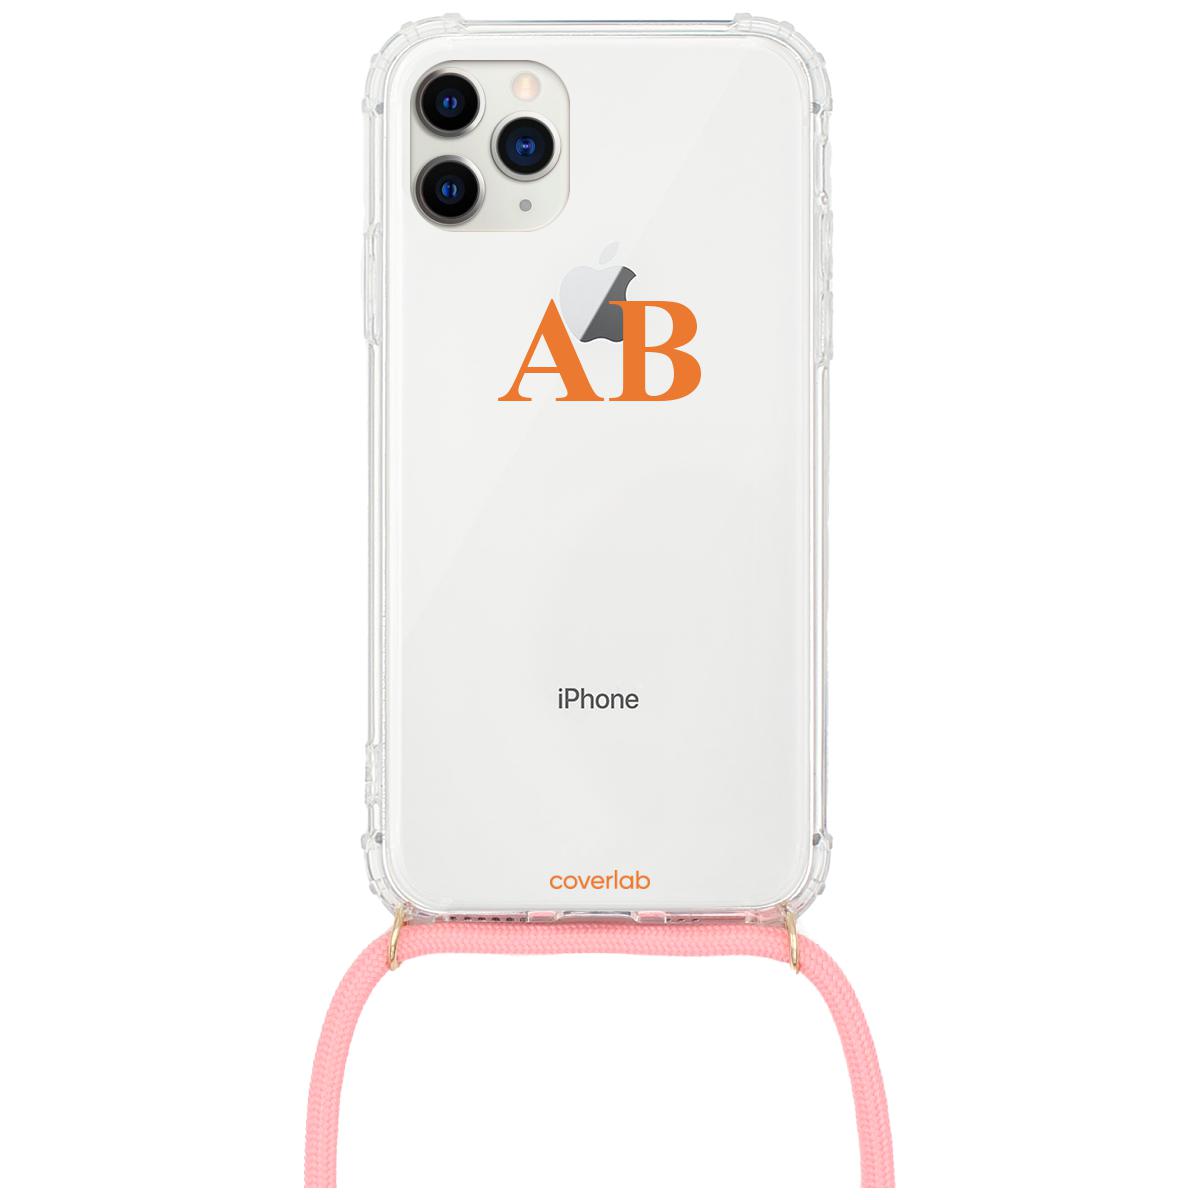 Serif Initials Personalised iPhone Case with Necklace